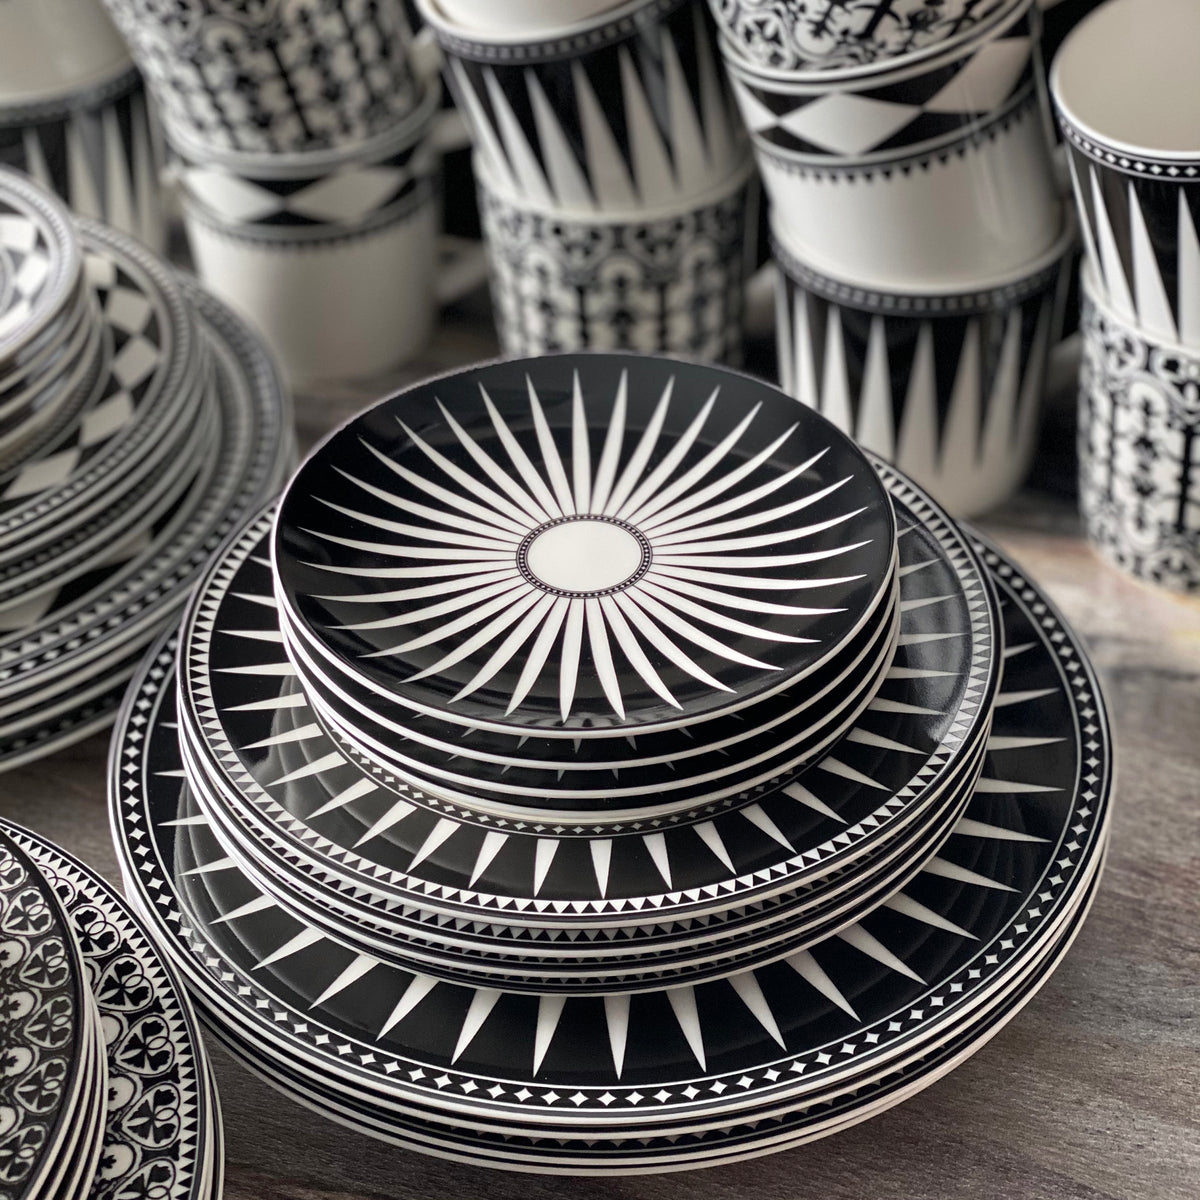 A stack of black and white patterned Marrakech Small Plates by Caskata Artisanal Home and high-fired porcelain bowls arranged on a wooden surface, with similarly patterned cups in the background evokes the charm of Marrakech.